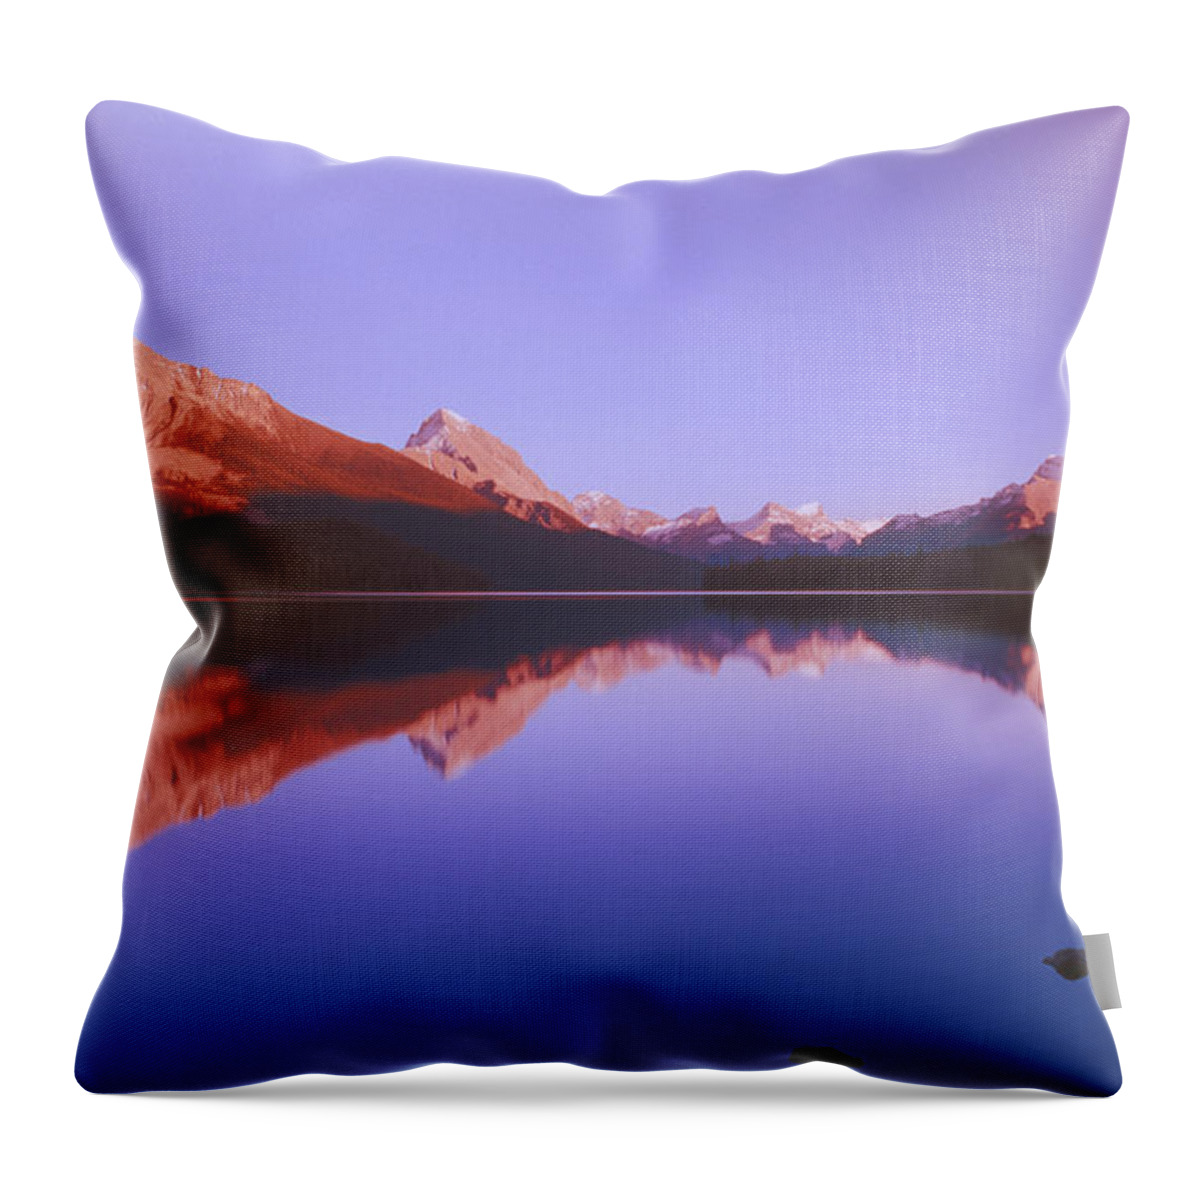 Tranquility Throw Pillow featuring the photograph Maligne Lake With Mountain Behind On A by Design Pics